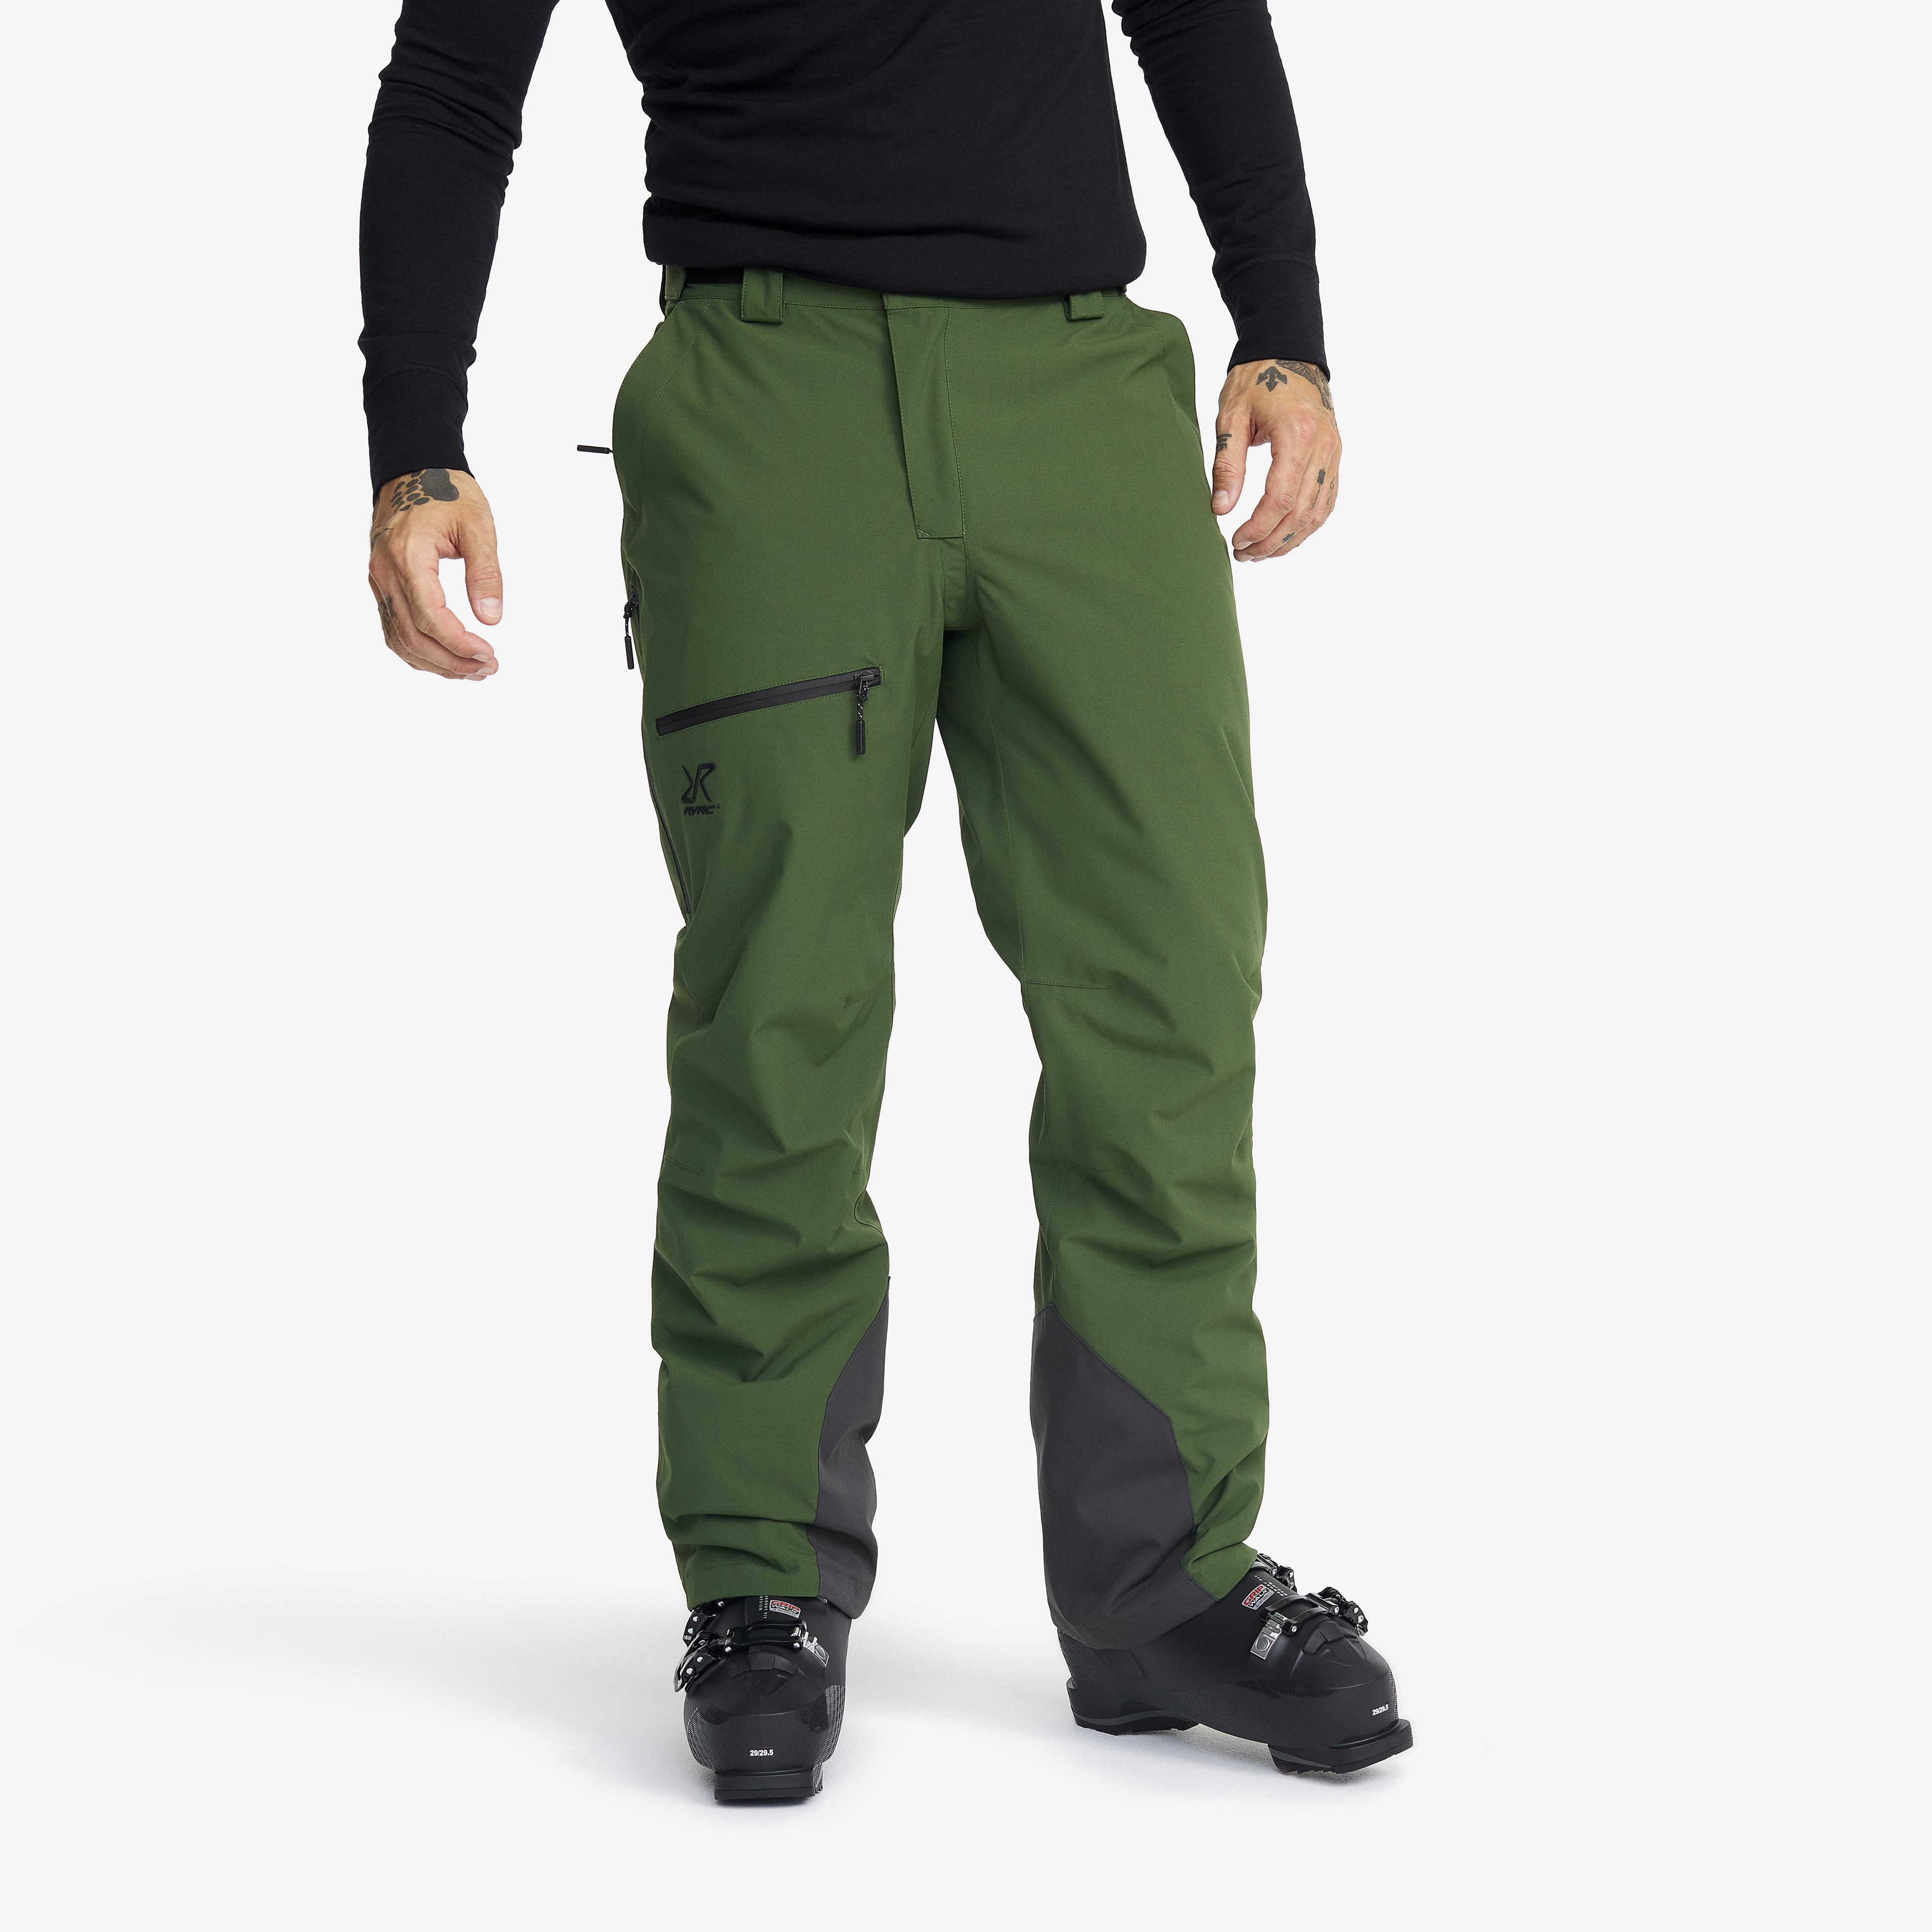 Halo 2L Insulated Snow Pants Black Forest Herren